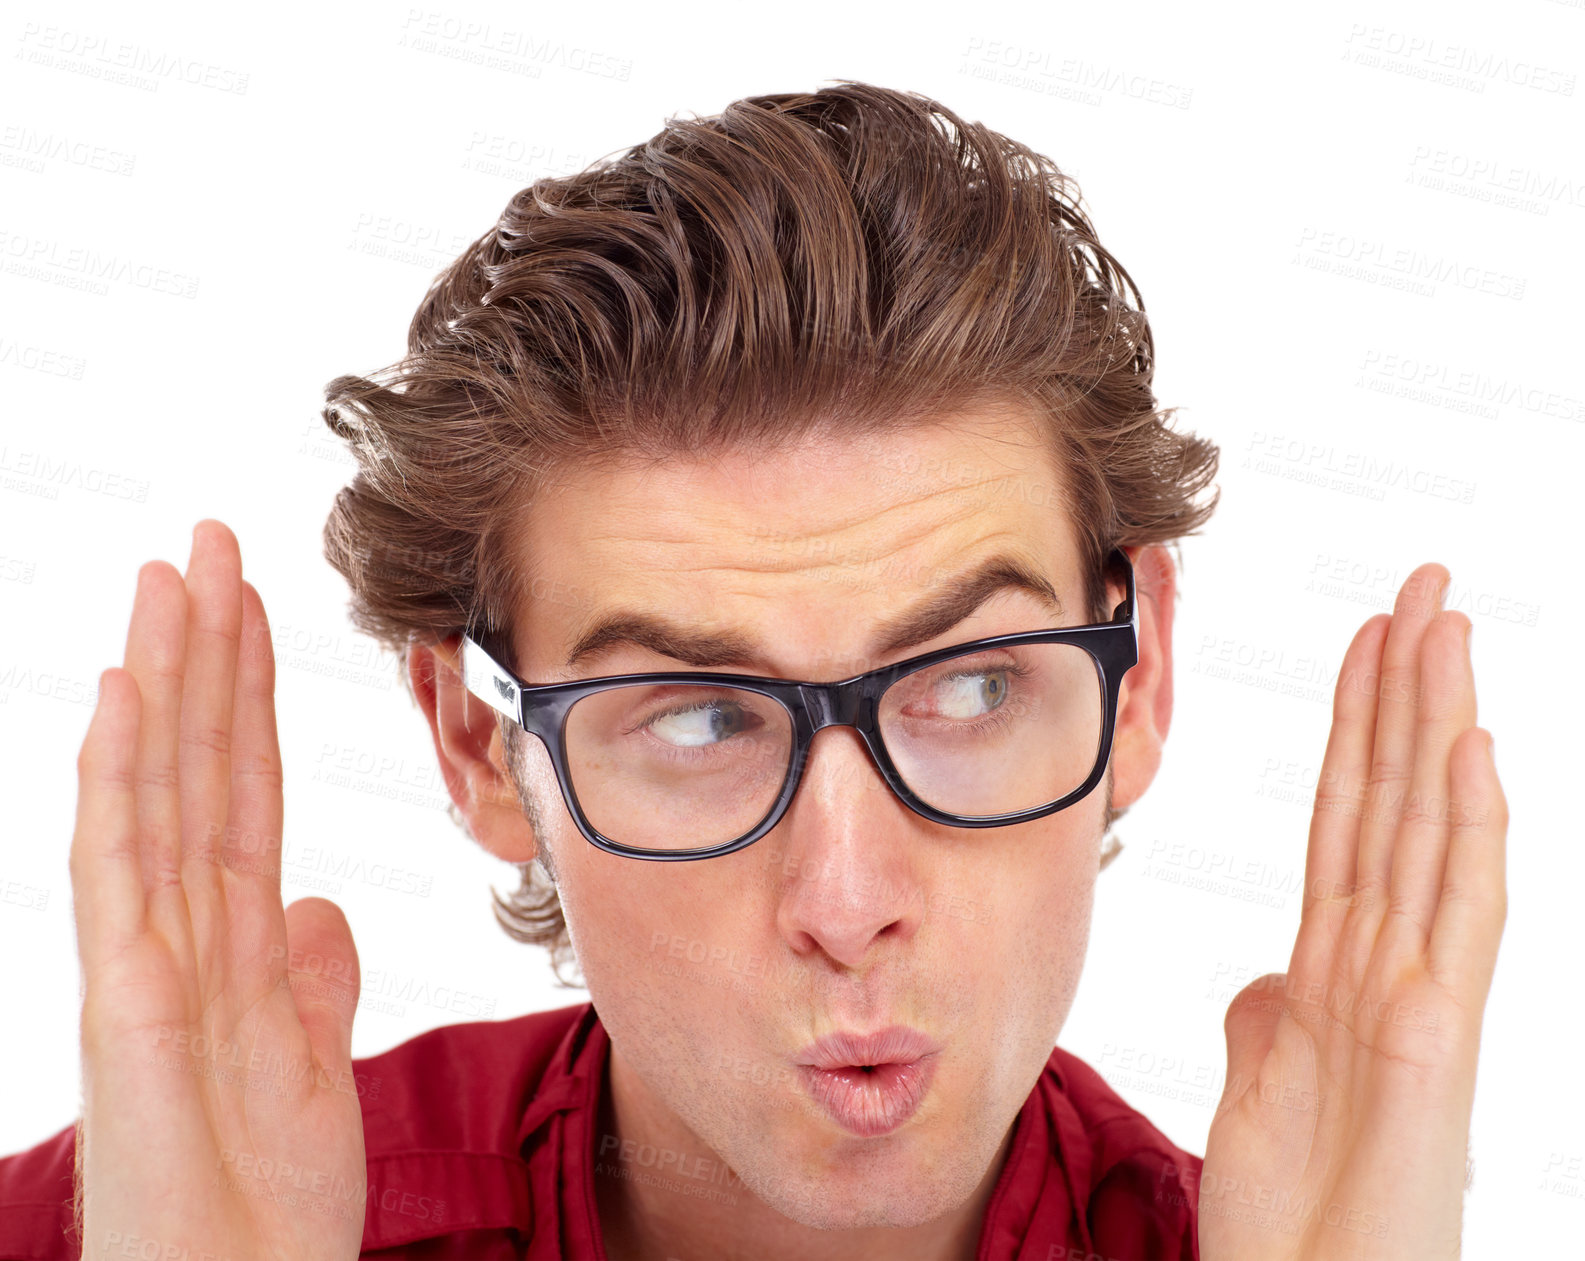 Buy stock photo Young man wearing glasses gesturing with his hands held next to his face